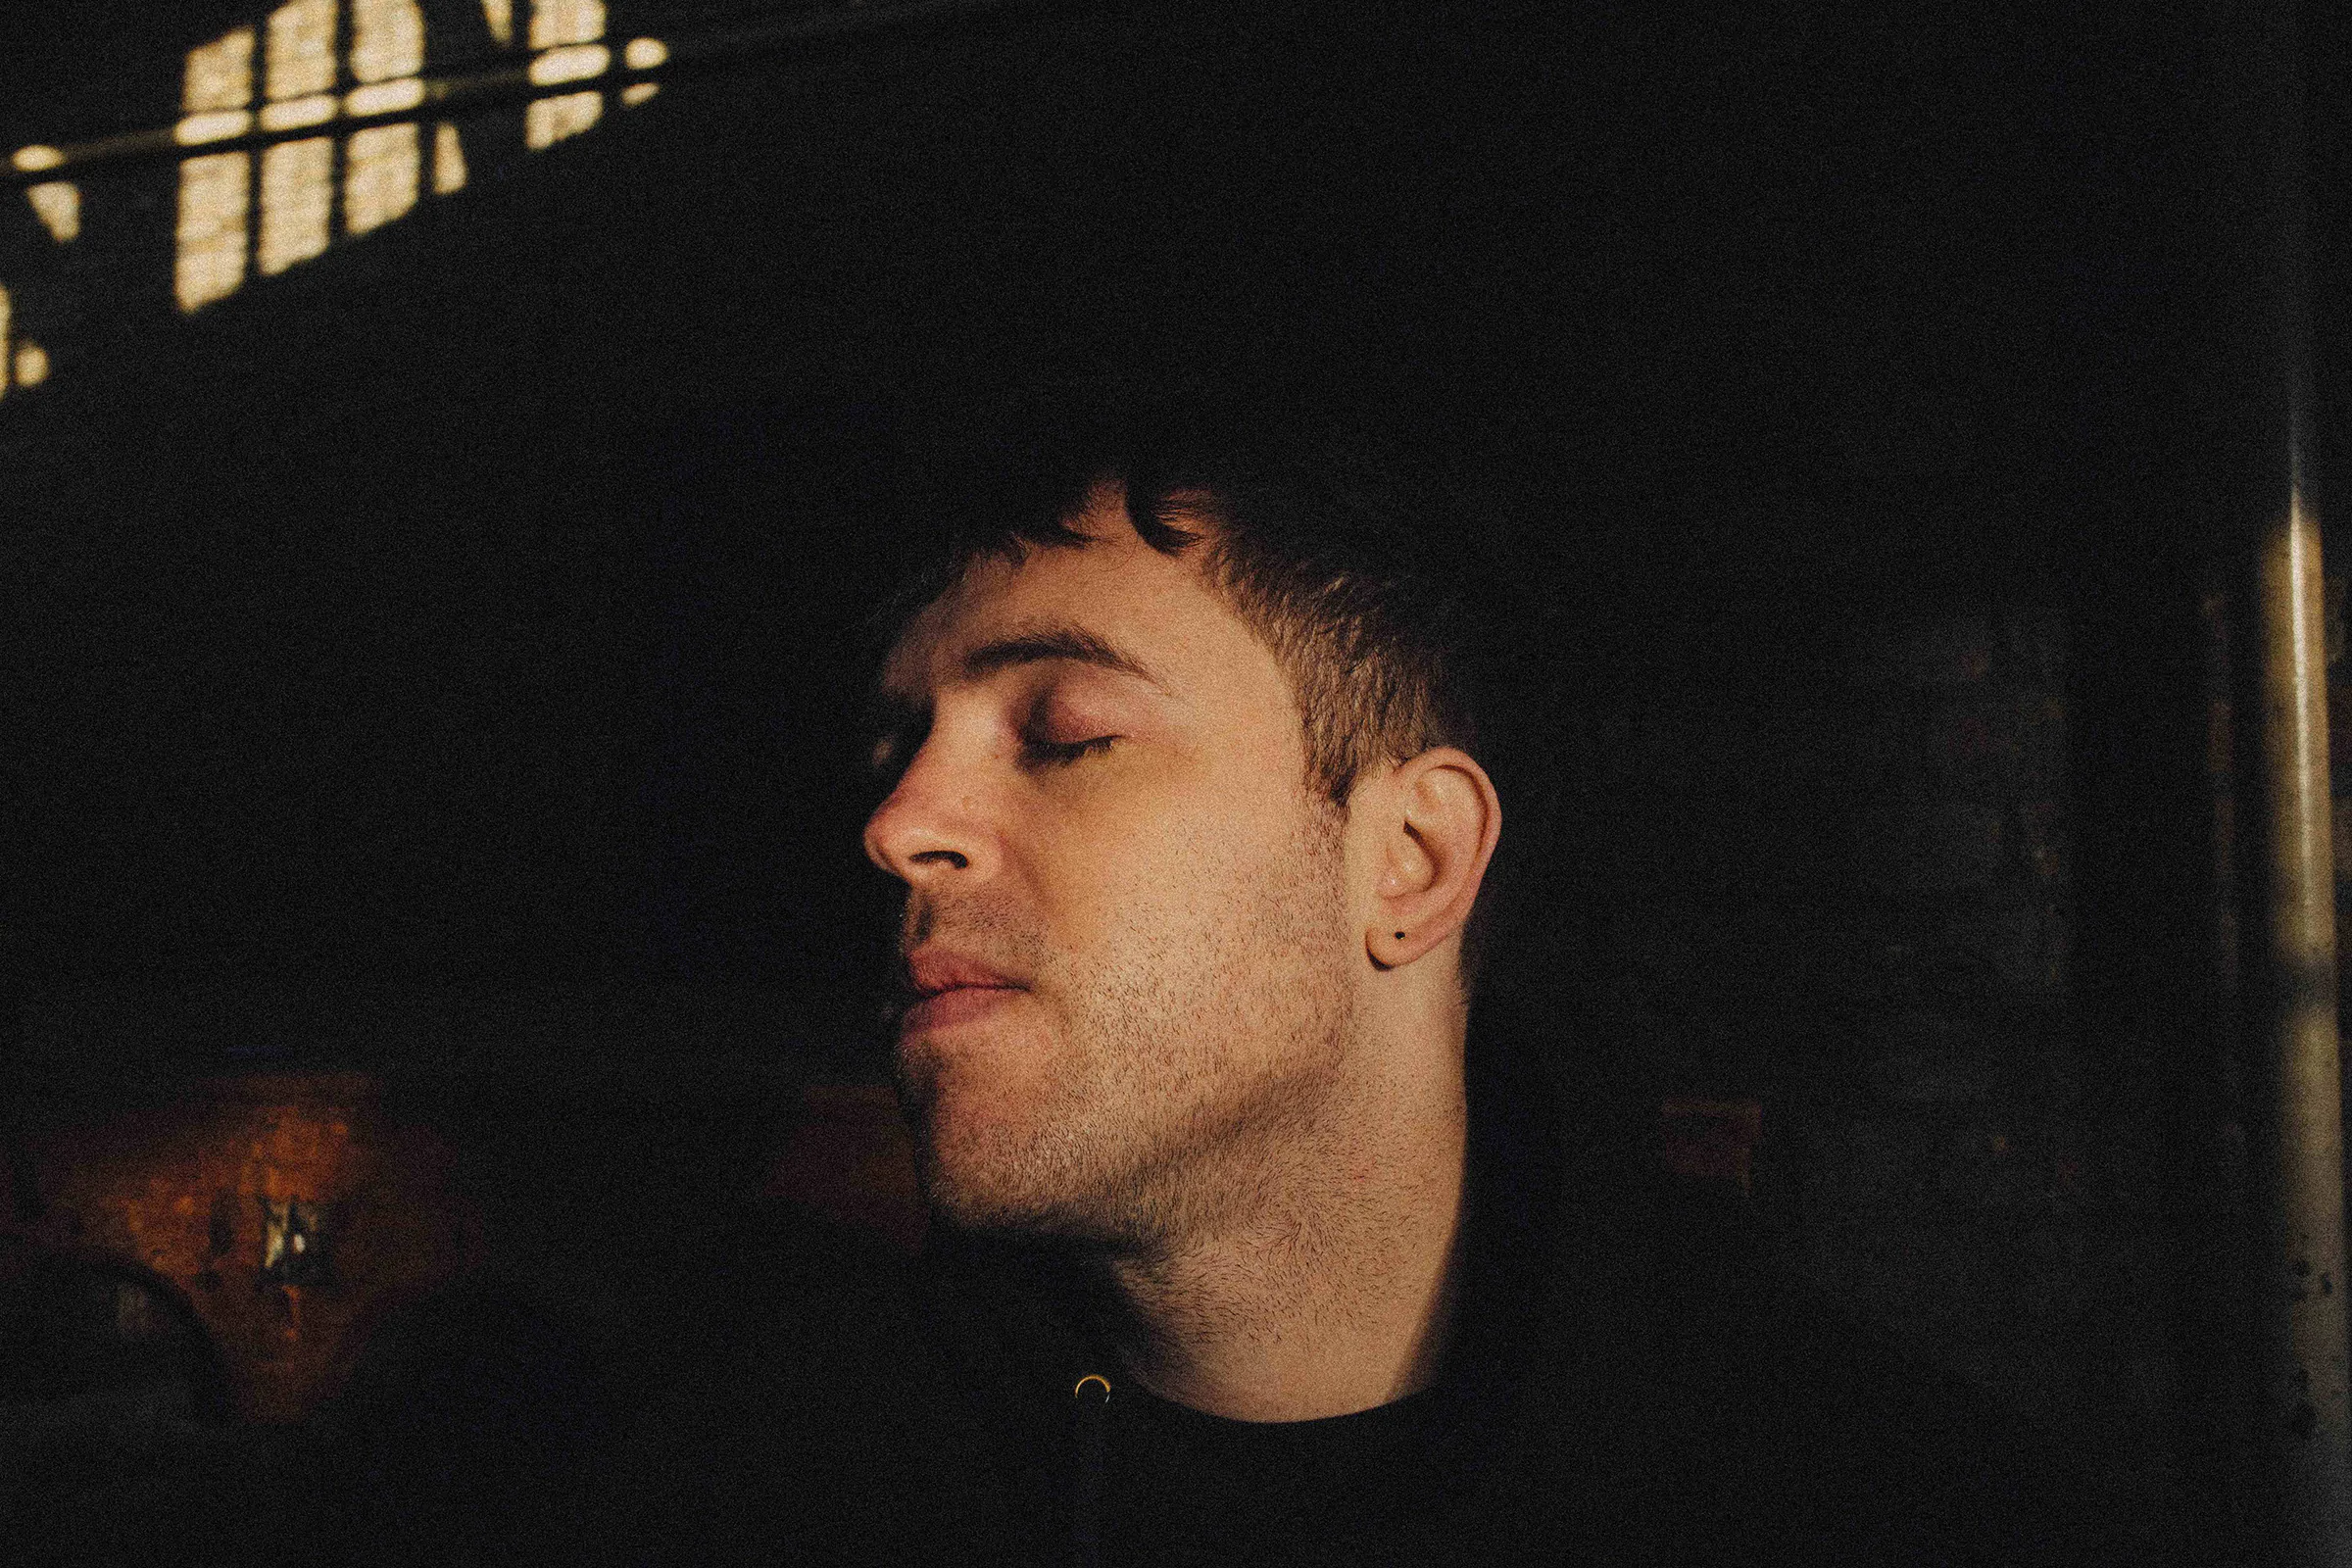 BENJAMIN FRANCIS LEFTWICH releases ‘Oh My God Please’ from his forthcoming album ‘To Carry A Whale’ – out June 18th